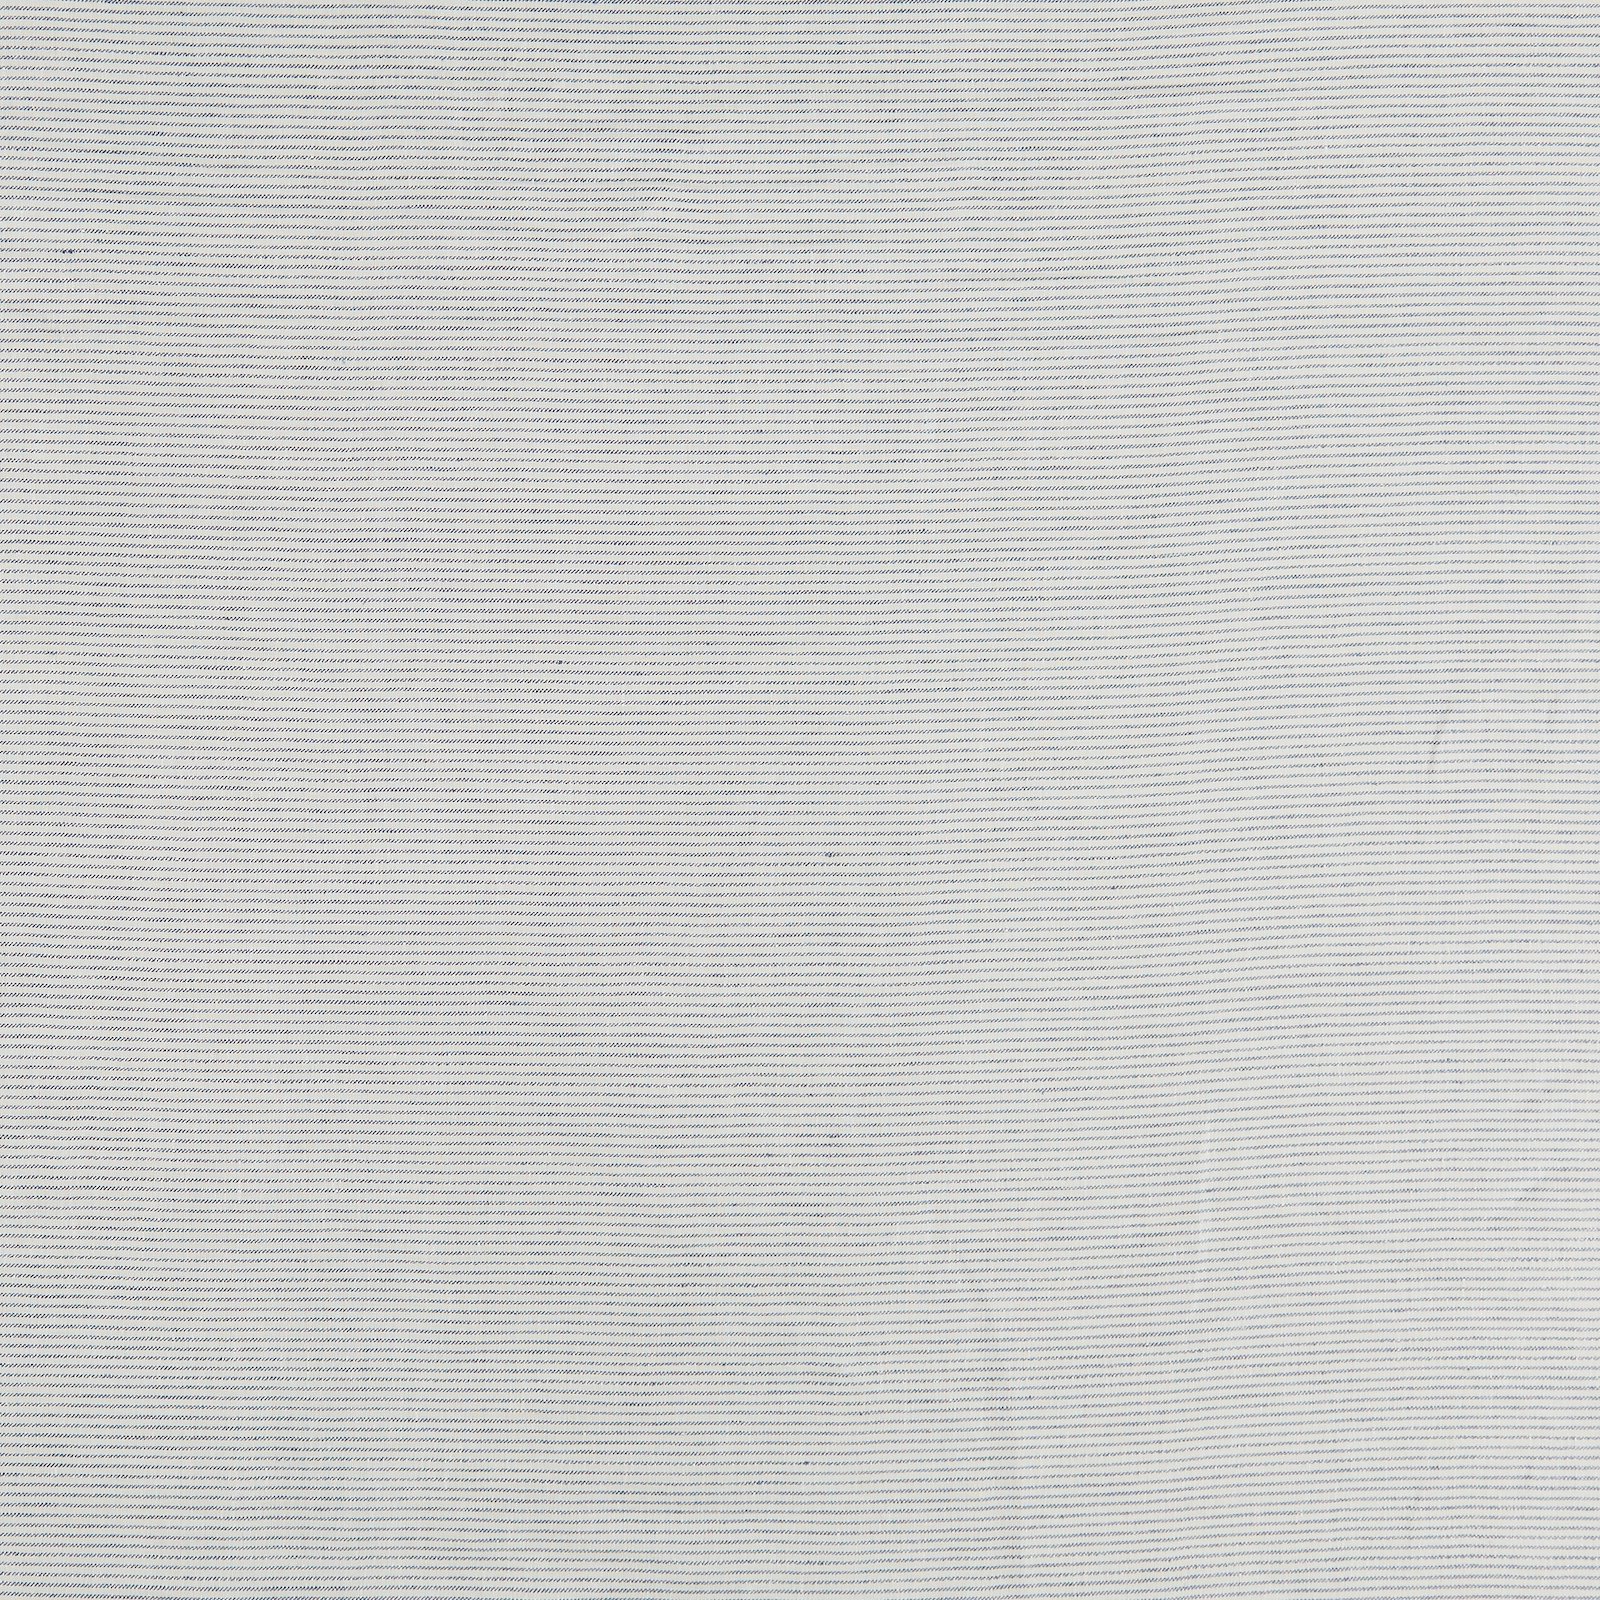 Linen YD off white with thin blue stripe 511028_pack_sp